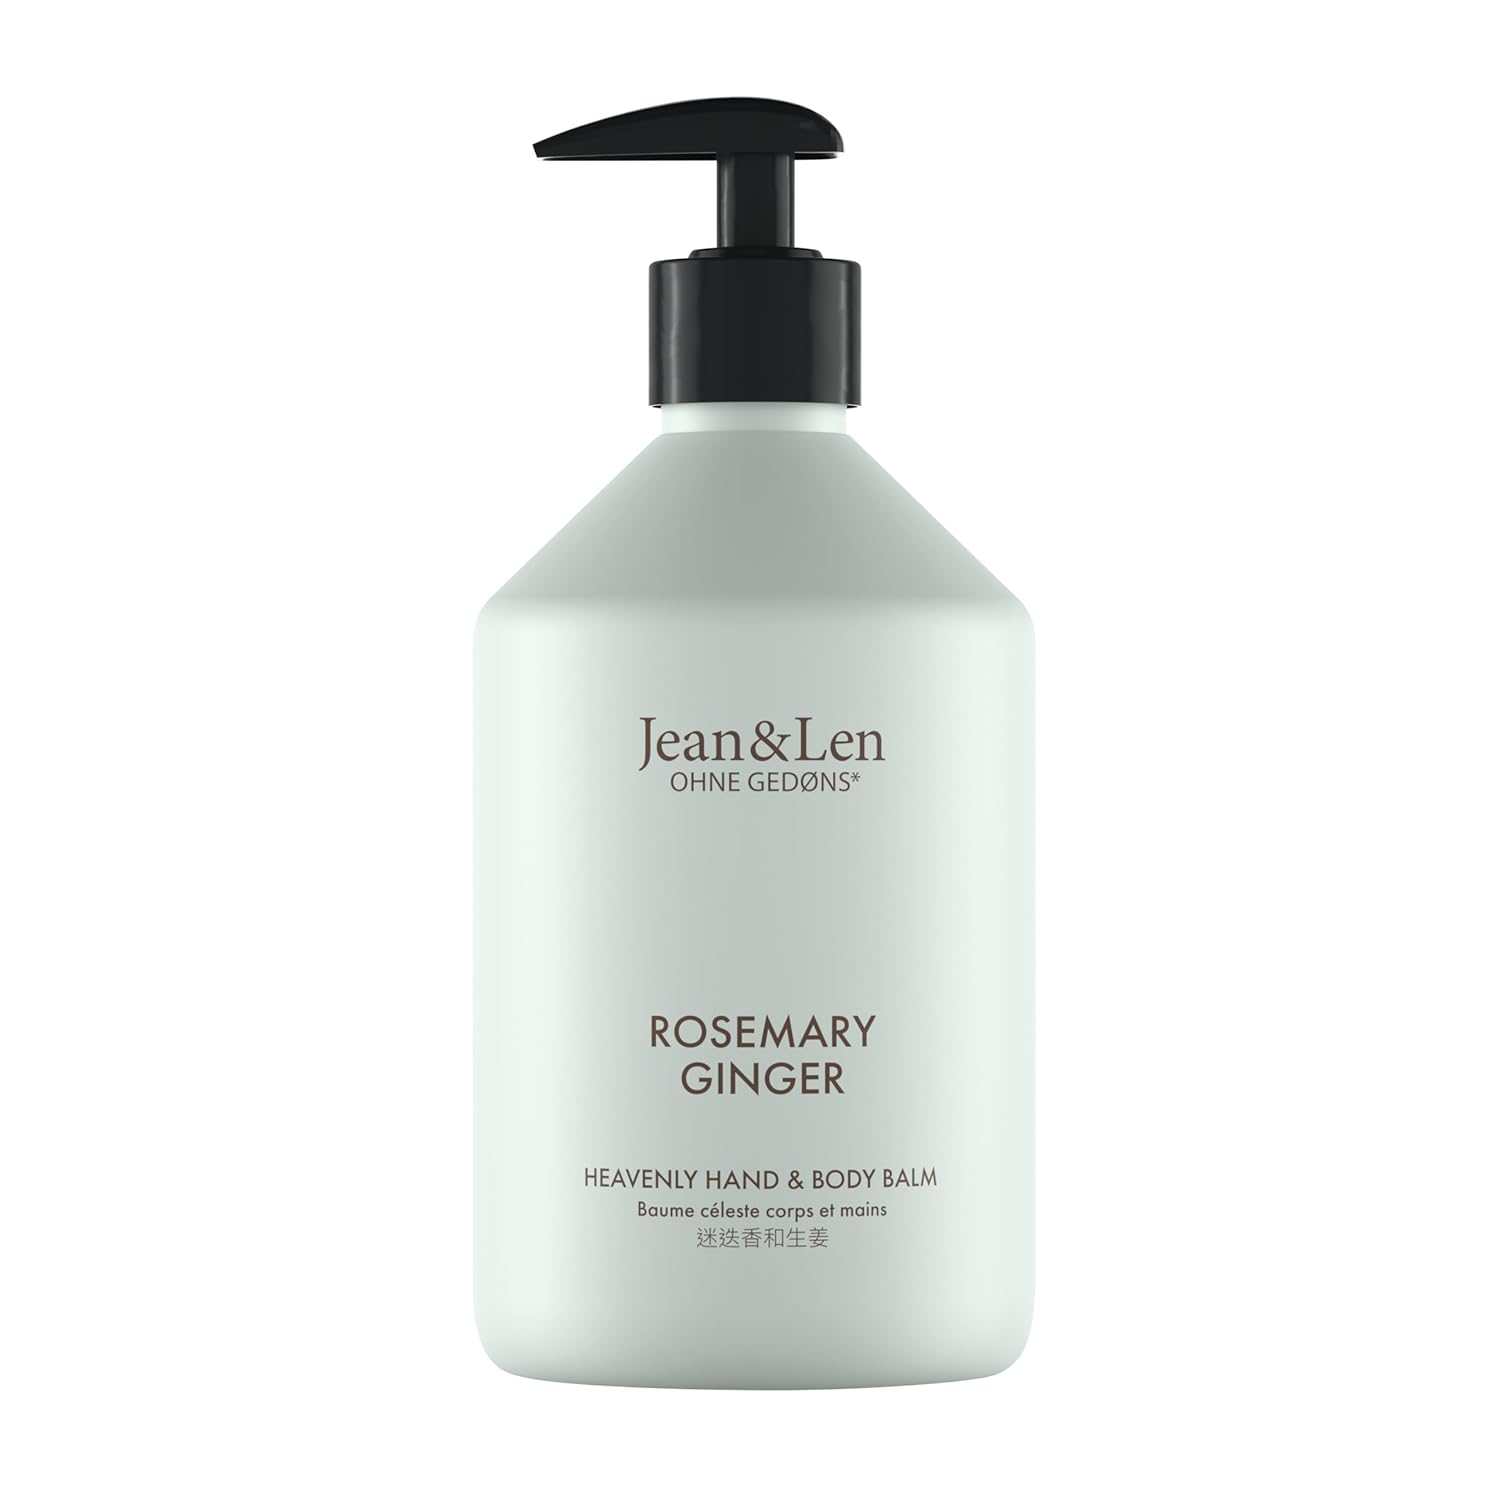 Jean & Len Heavenly Hand & Body Balm Rosemary & Ginger for a fragrant care experience with organic argan oil and shea butter, high quality Bottle, Parabens & Silicone-Free Bottle, 500 ml